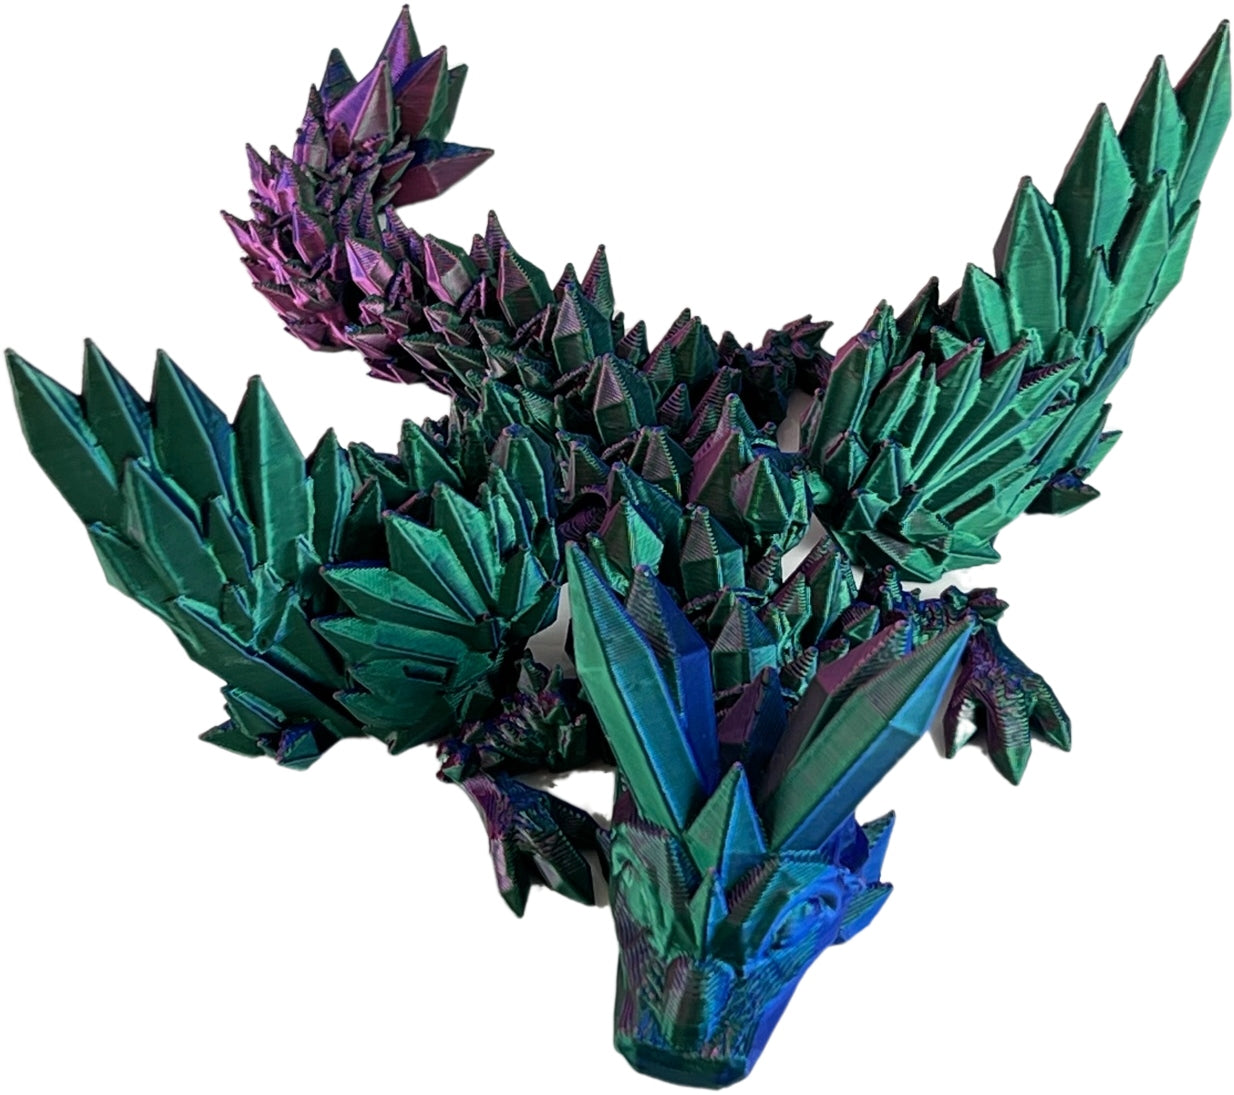 3D Crystal Dragon with Wings - Small